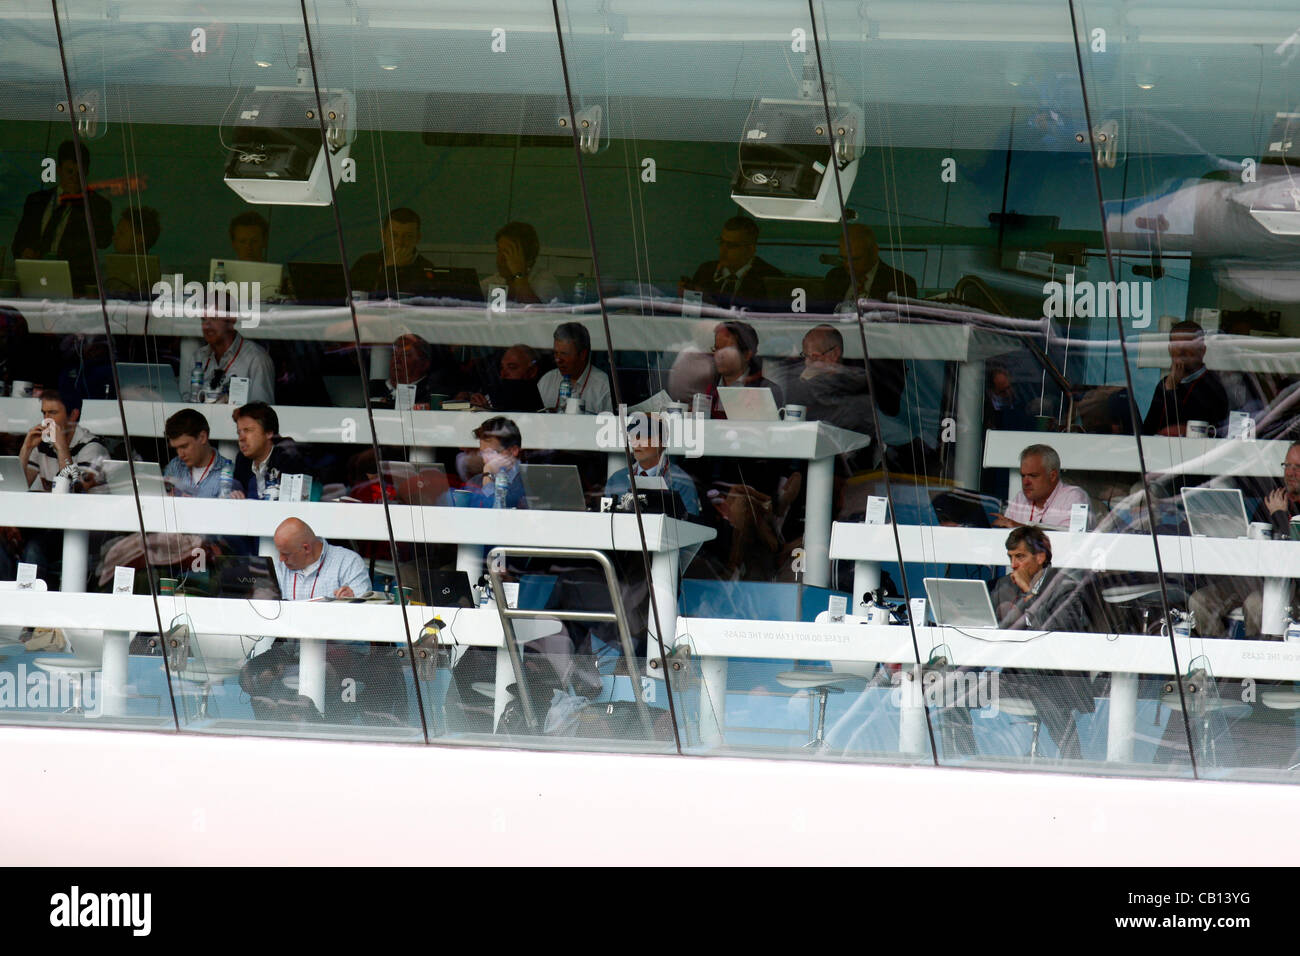 17.05.12 Lords, London. Reporters in the Media area during the Investec First Test (1st Day of 5) between England and West Indies. Stock Photo